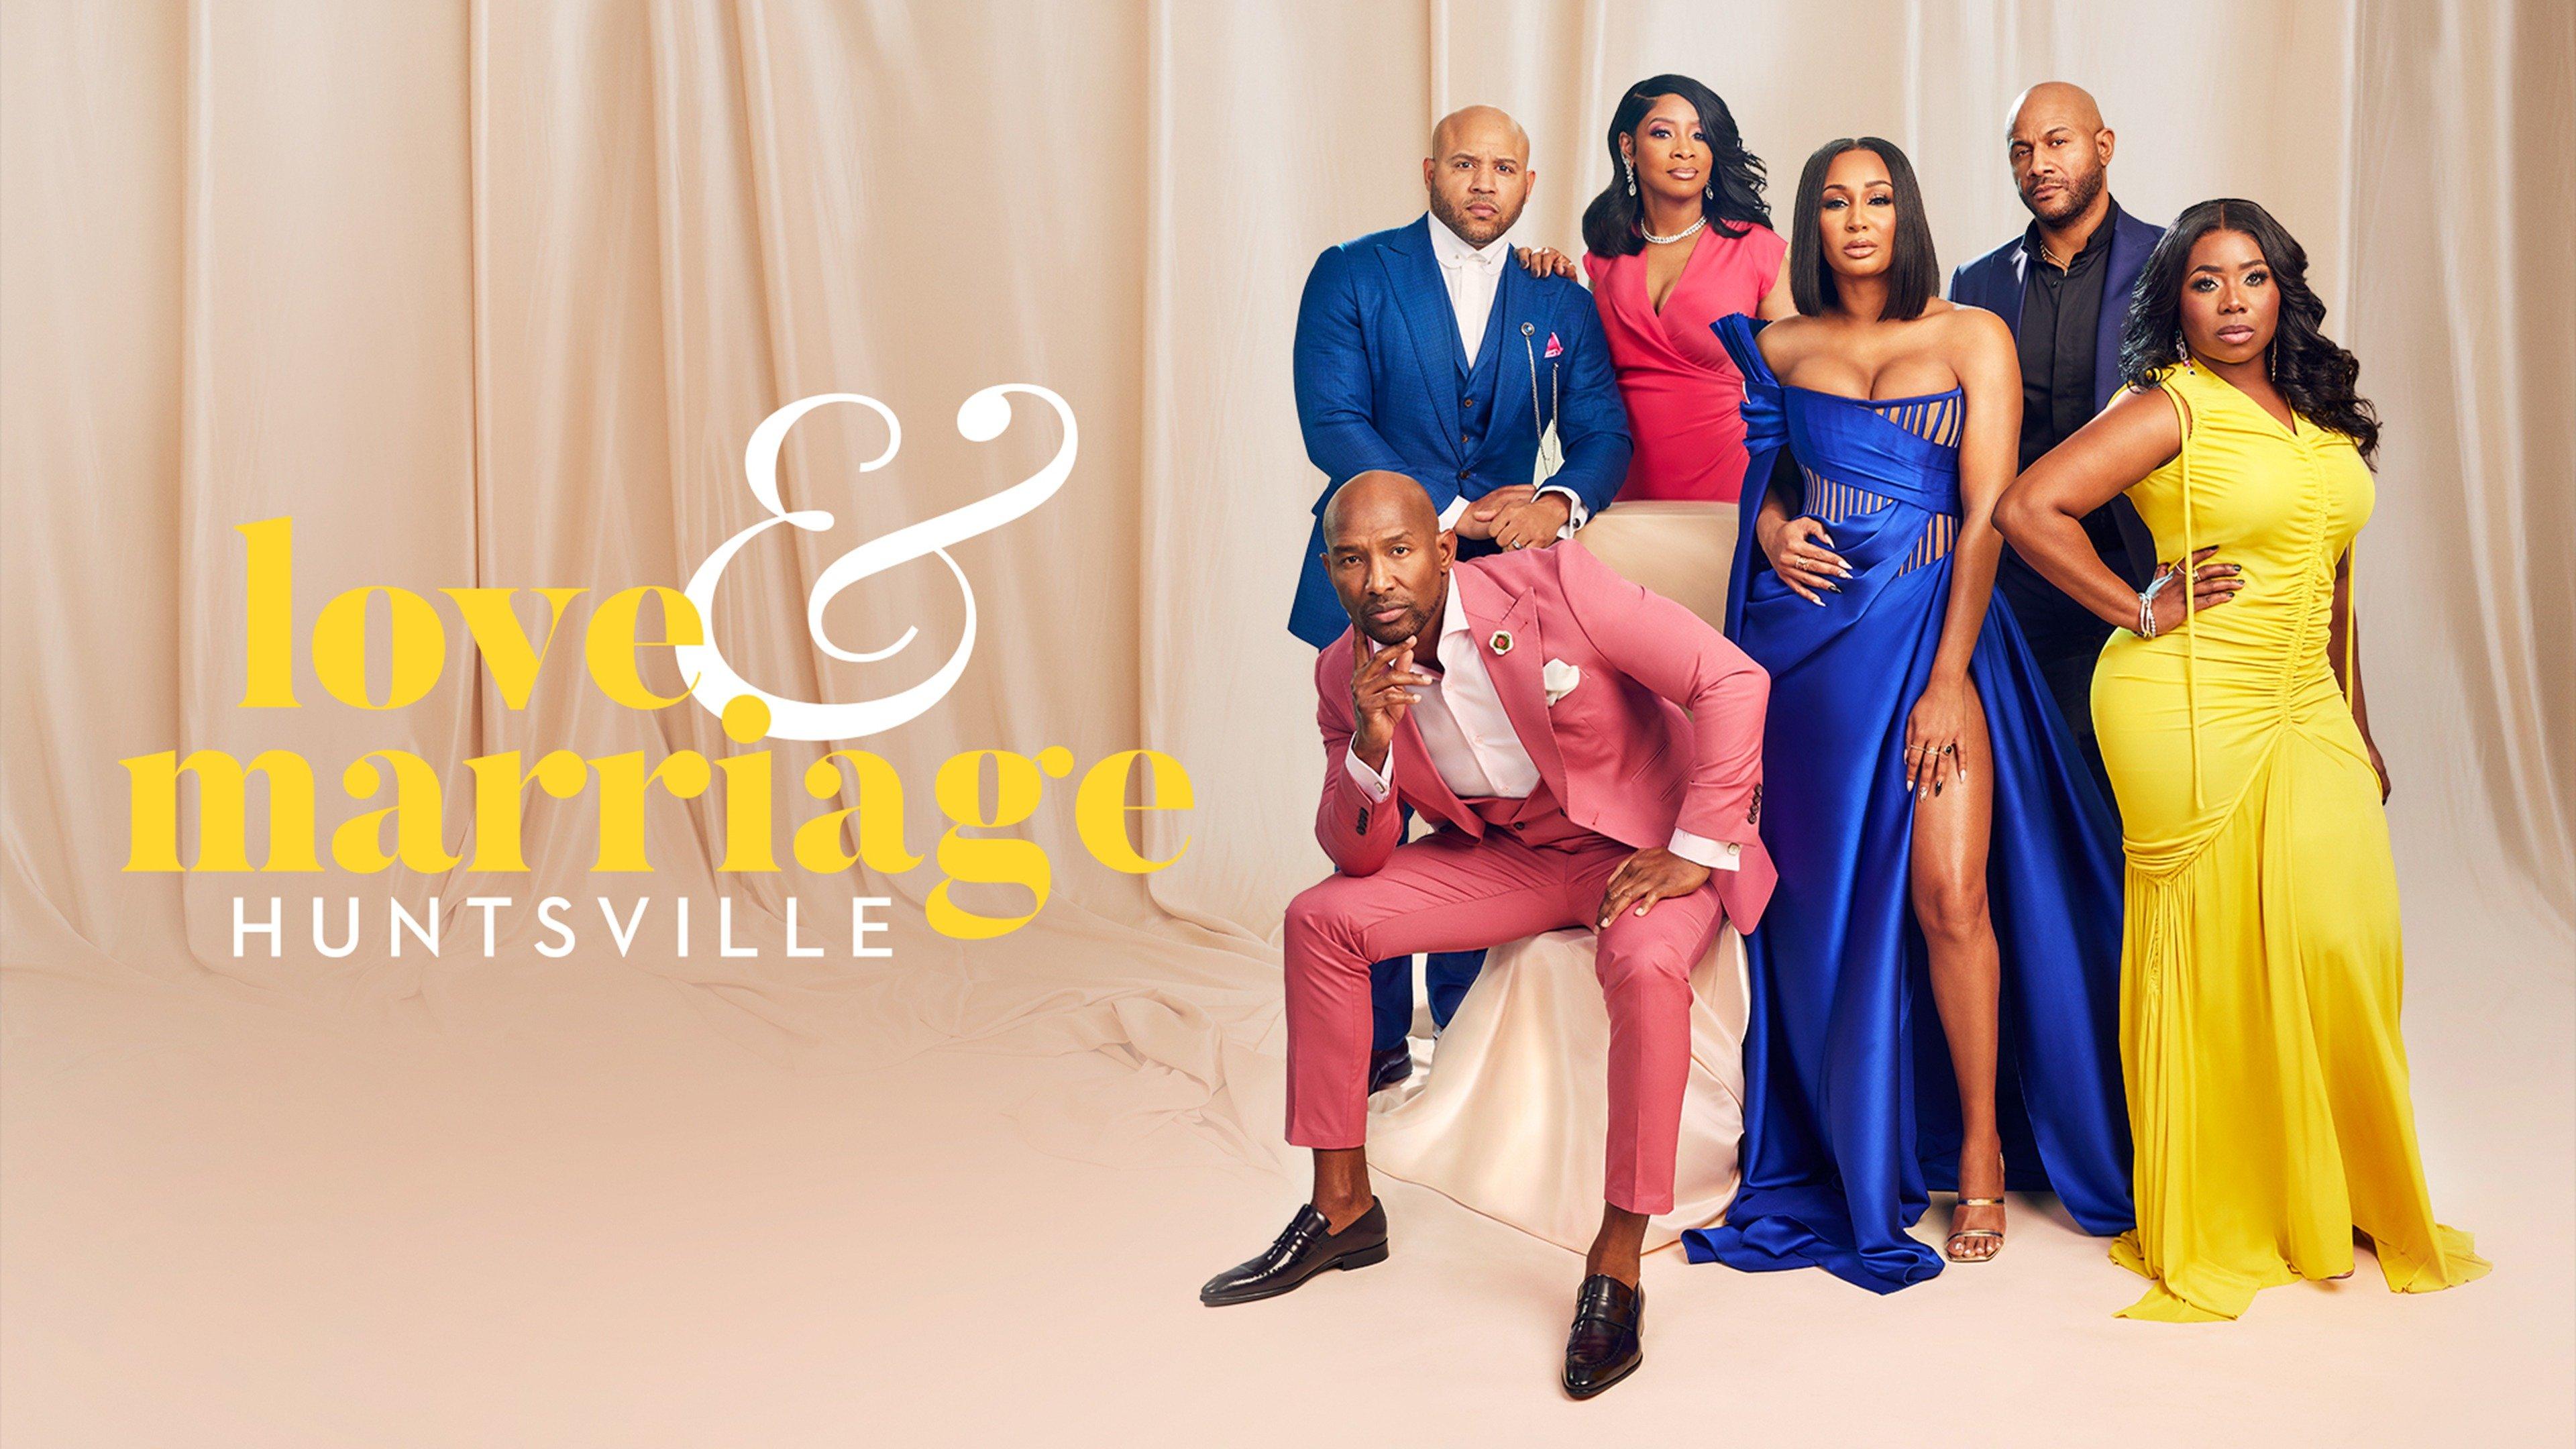 Watch Love & Marriage Huntsville Streaming Online on Philo (Free Trial)